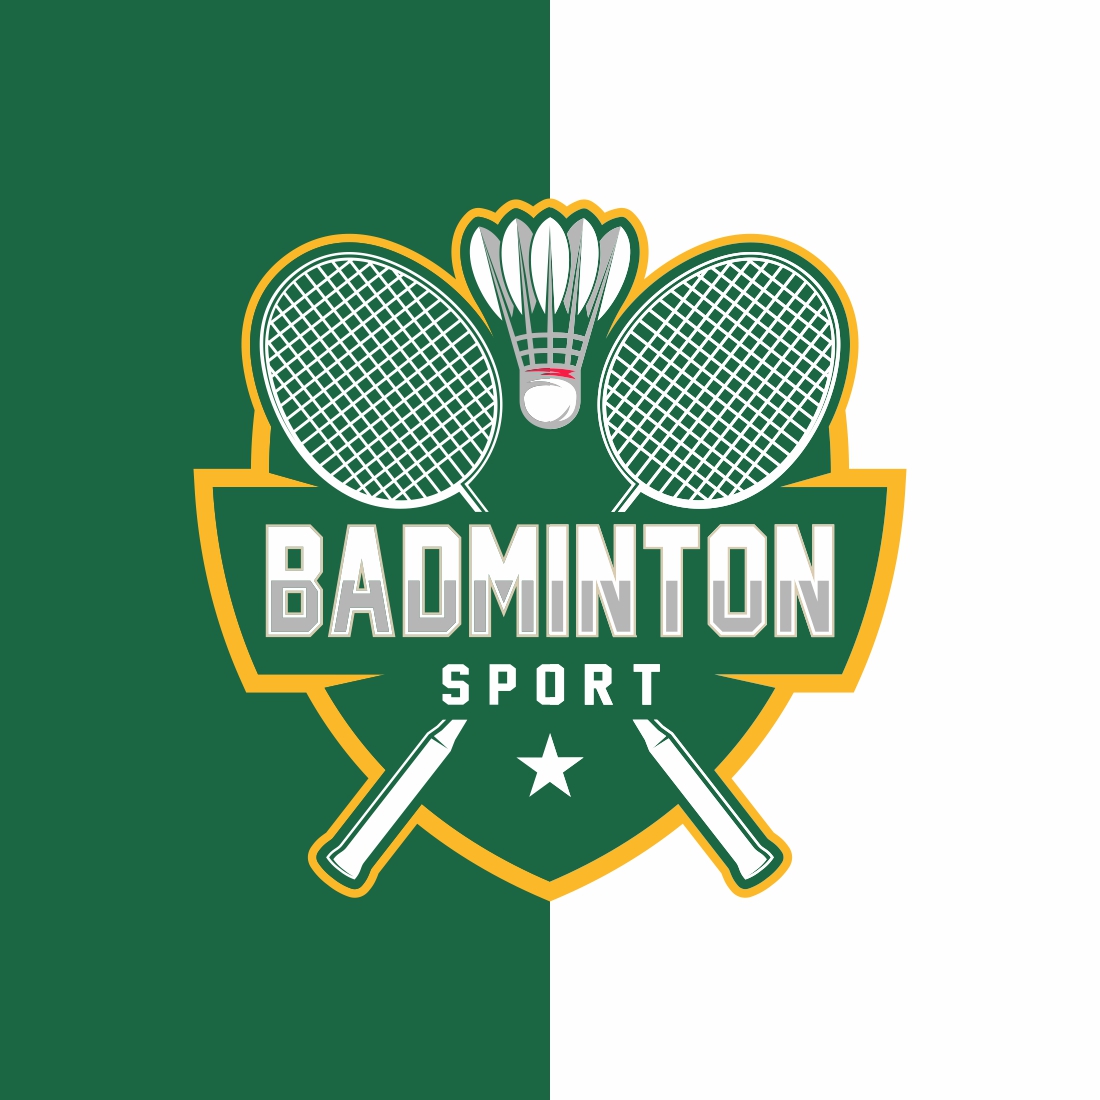 Badminton badge logo in modern minimalist style – Only $7 preview image.